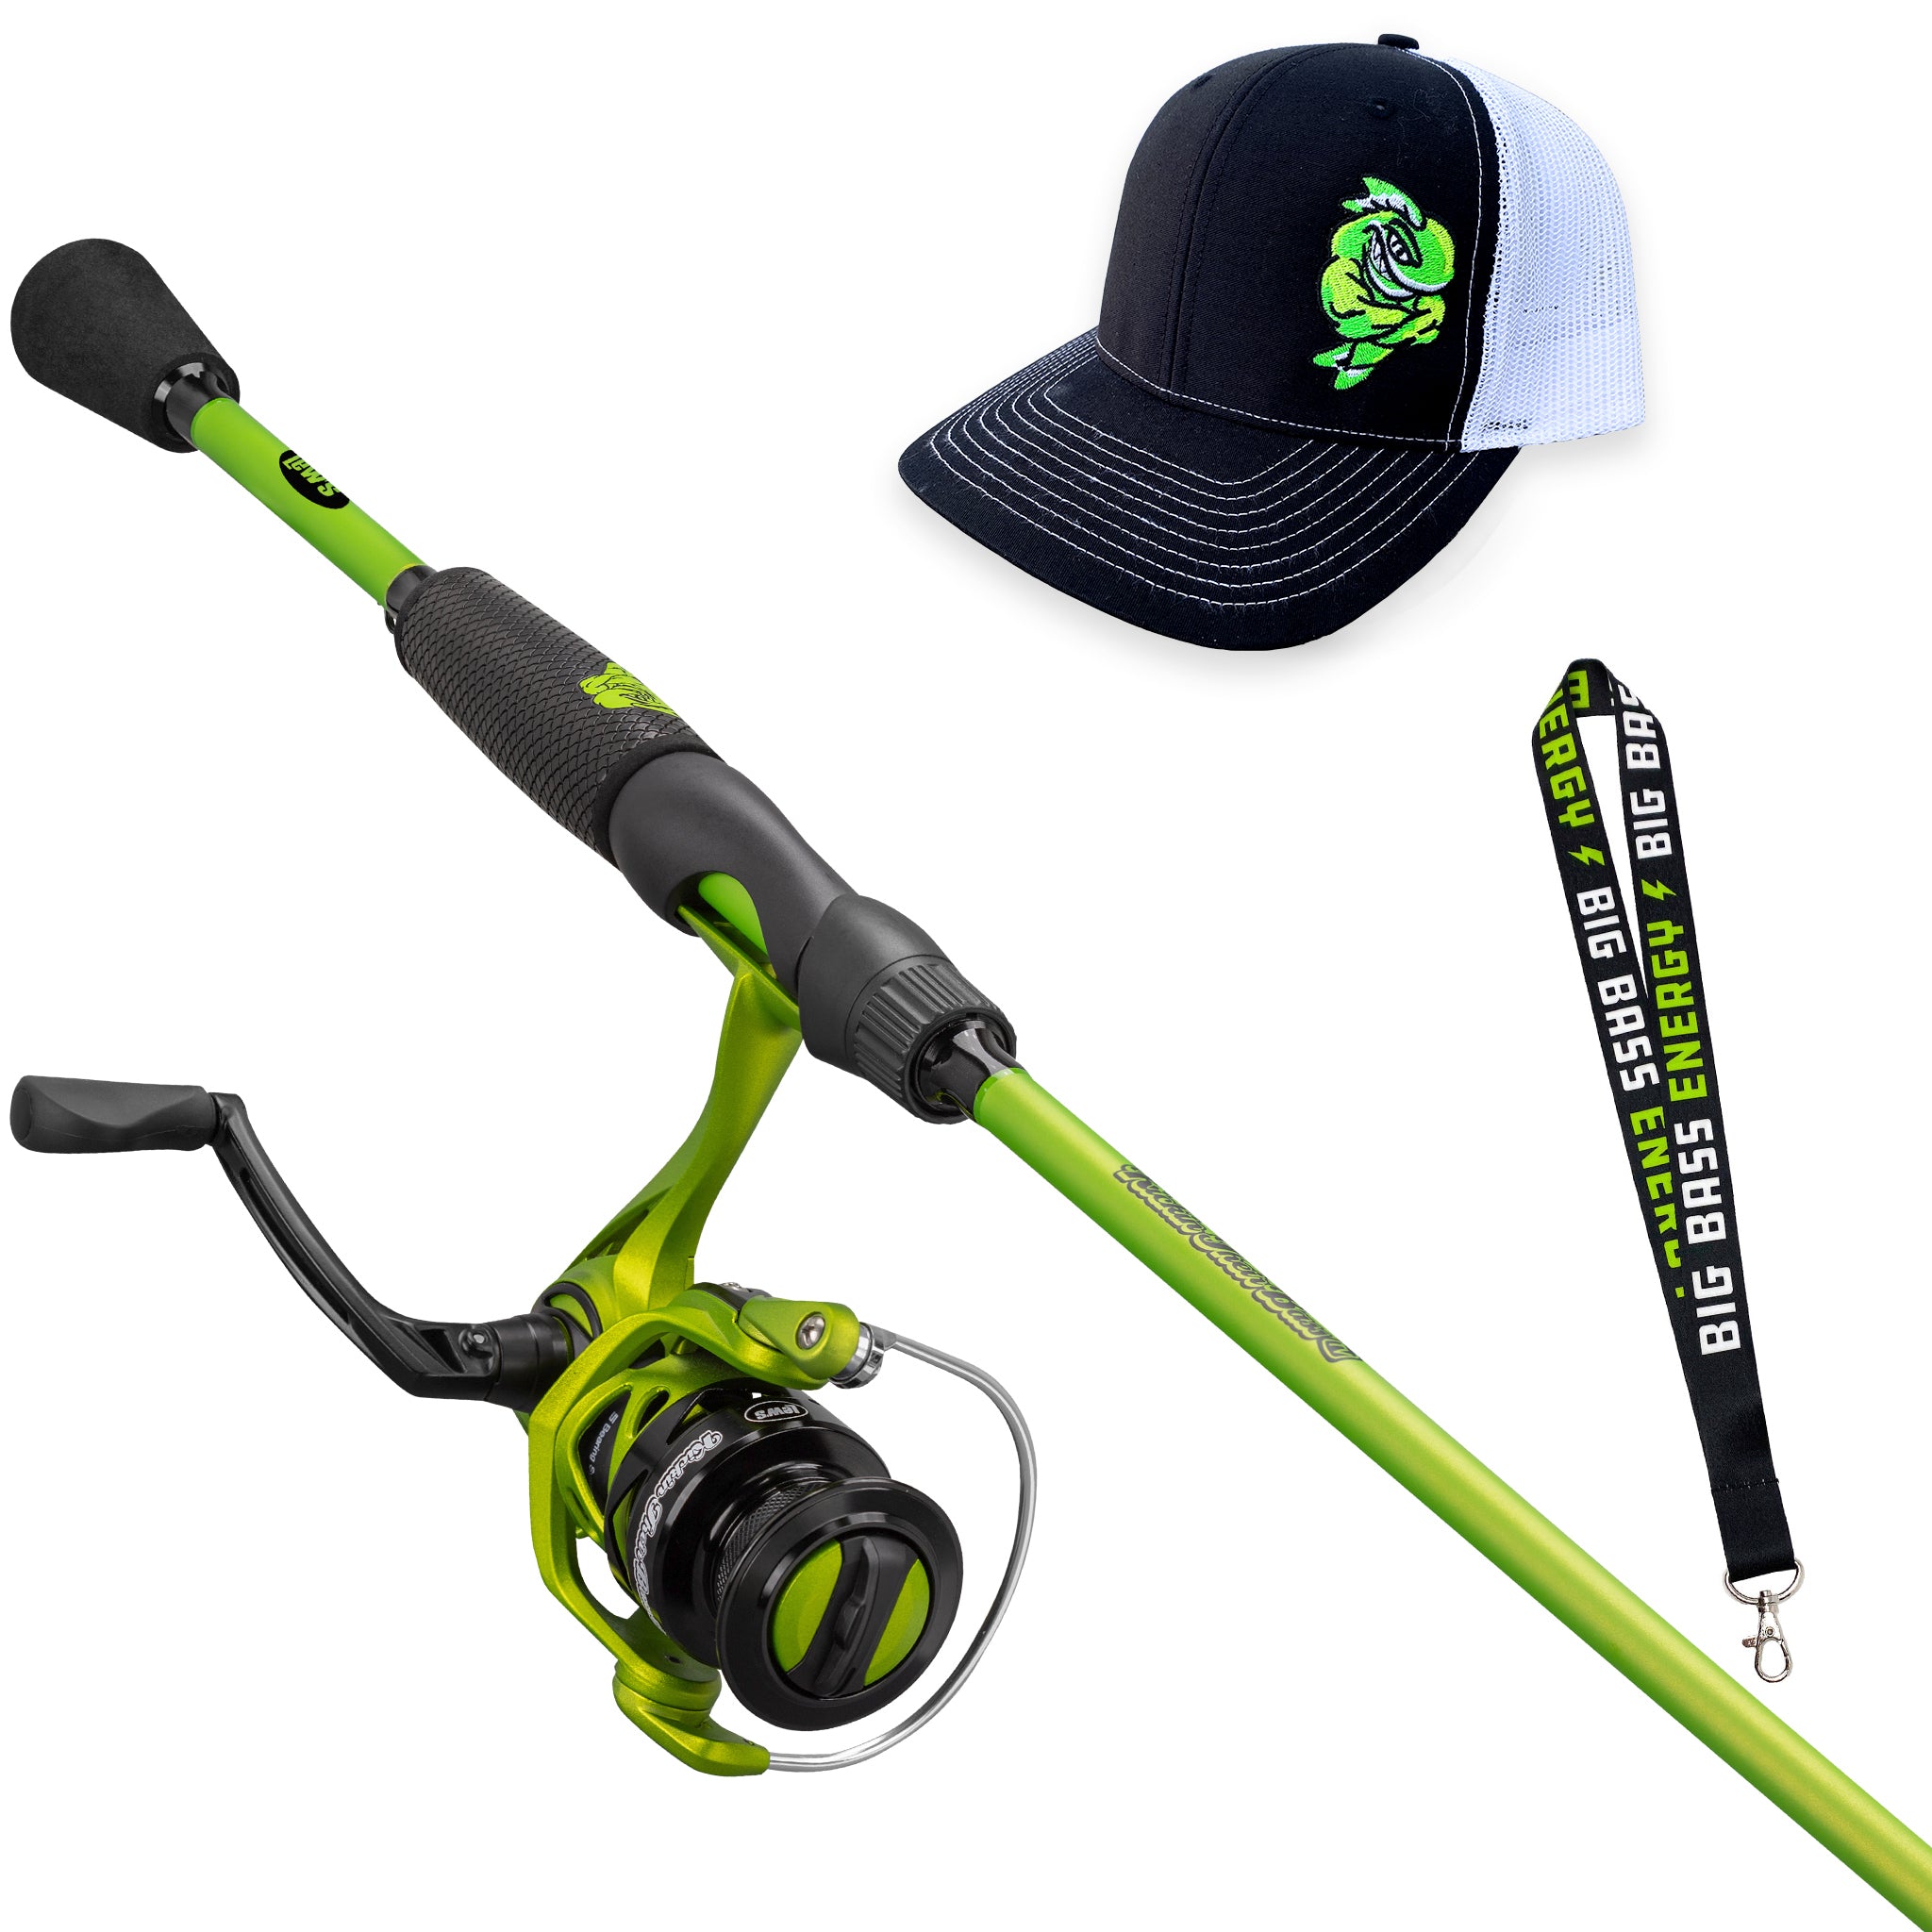 Kickin' Their Bass x Lew's Spinning Combo Package